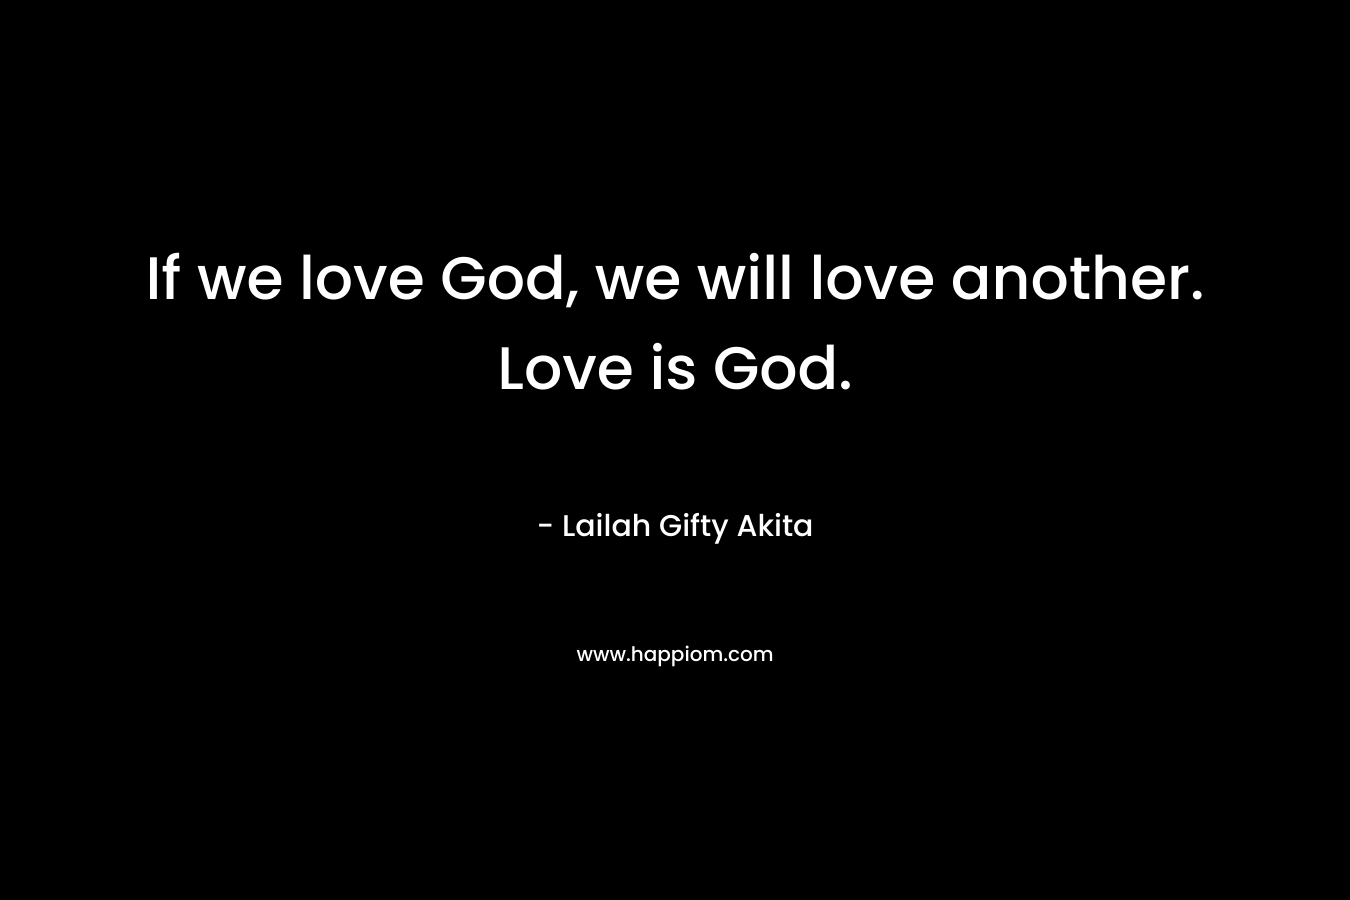 If we love God, we will love another. Love is God.